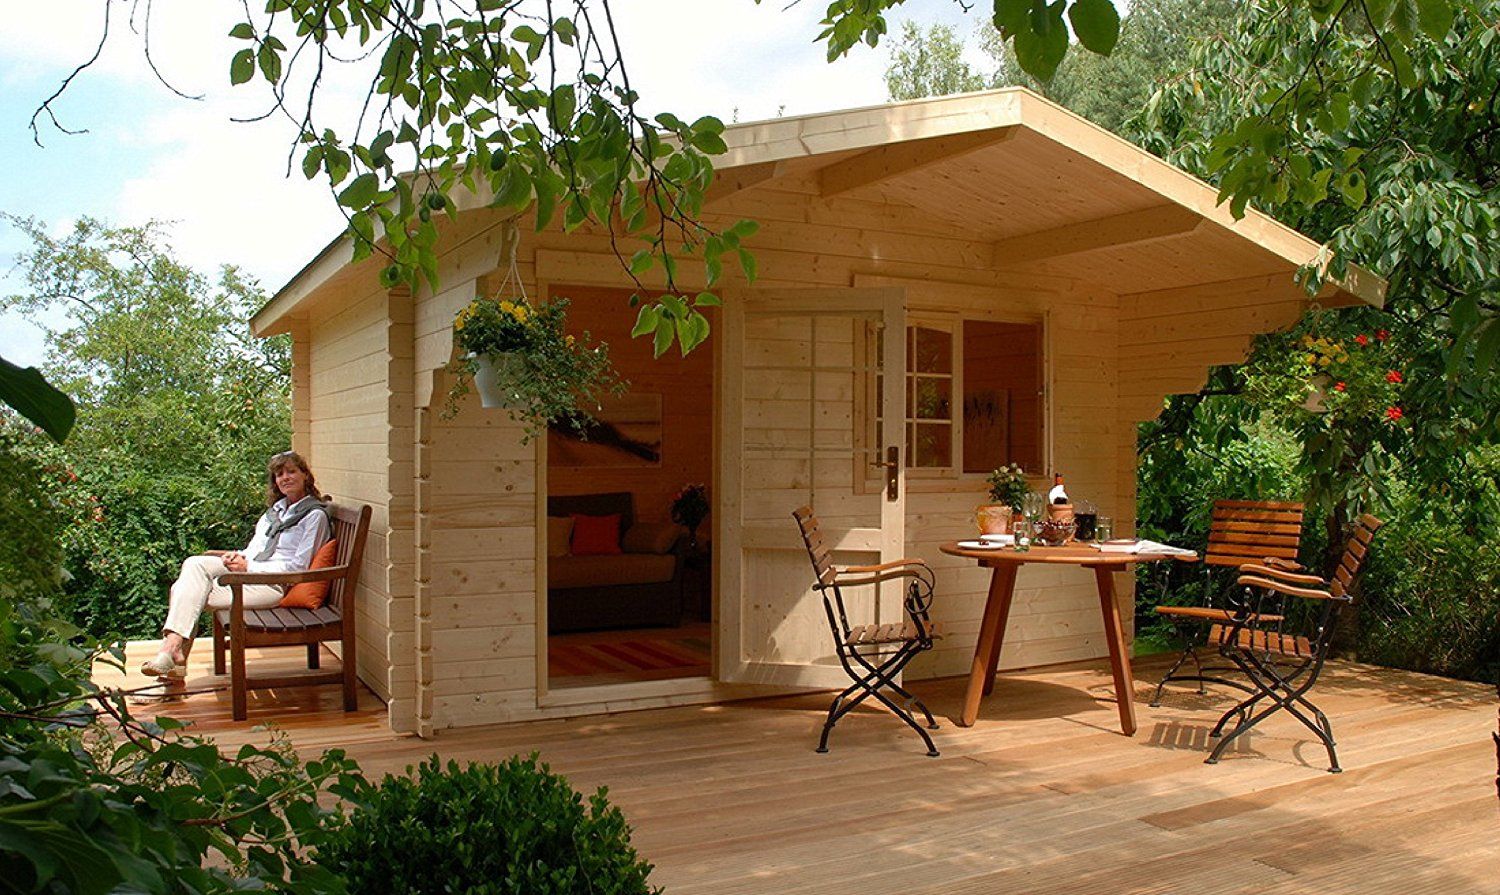 What You Should Know Before You Buy a Tiny Home Kit